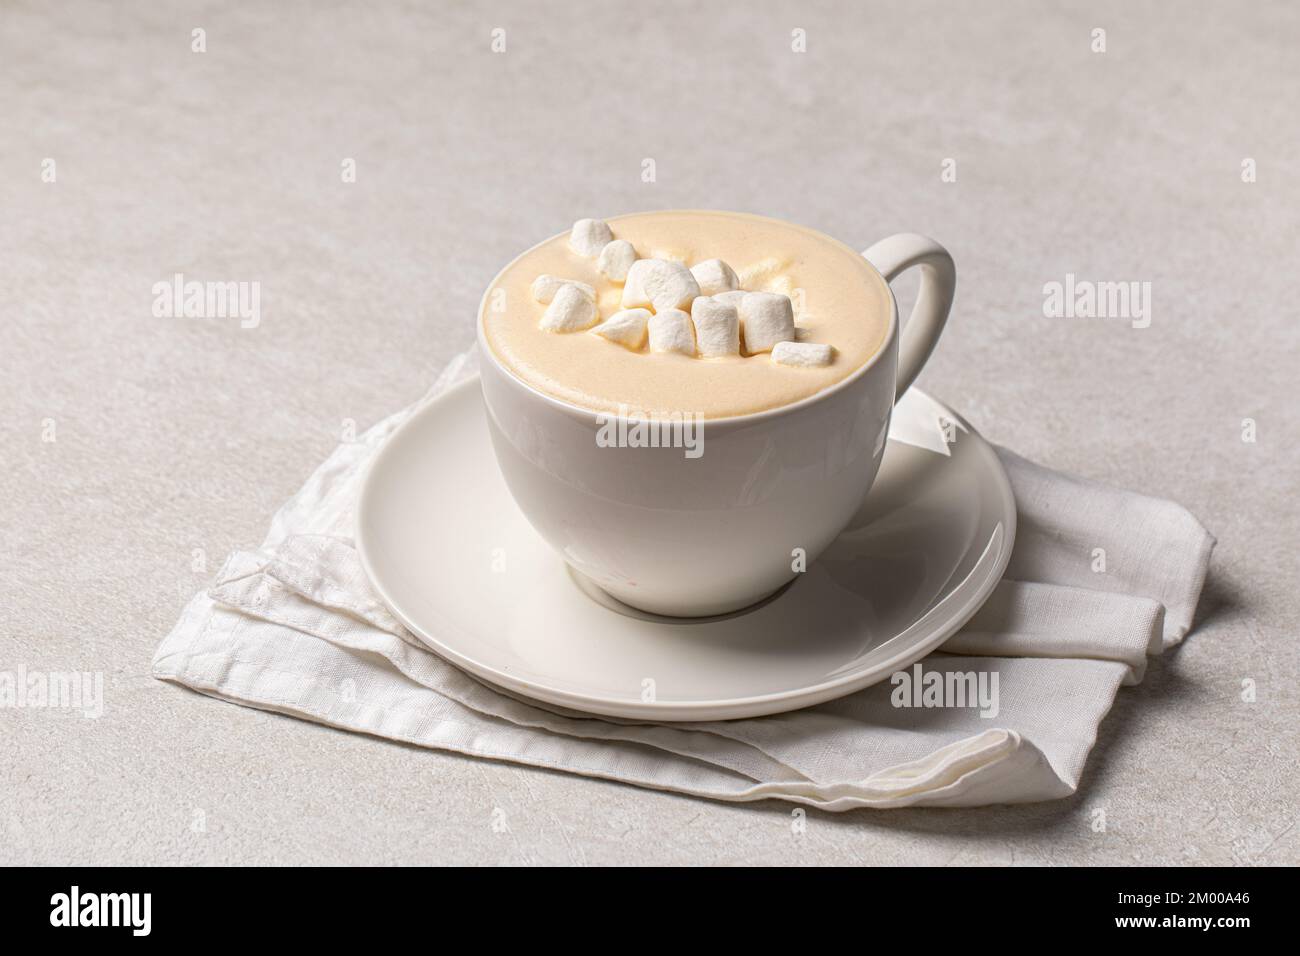 Cup of cappuccino coffee with marshmallows Stock Photo